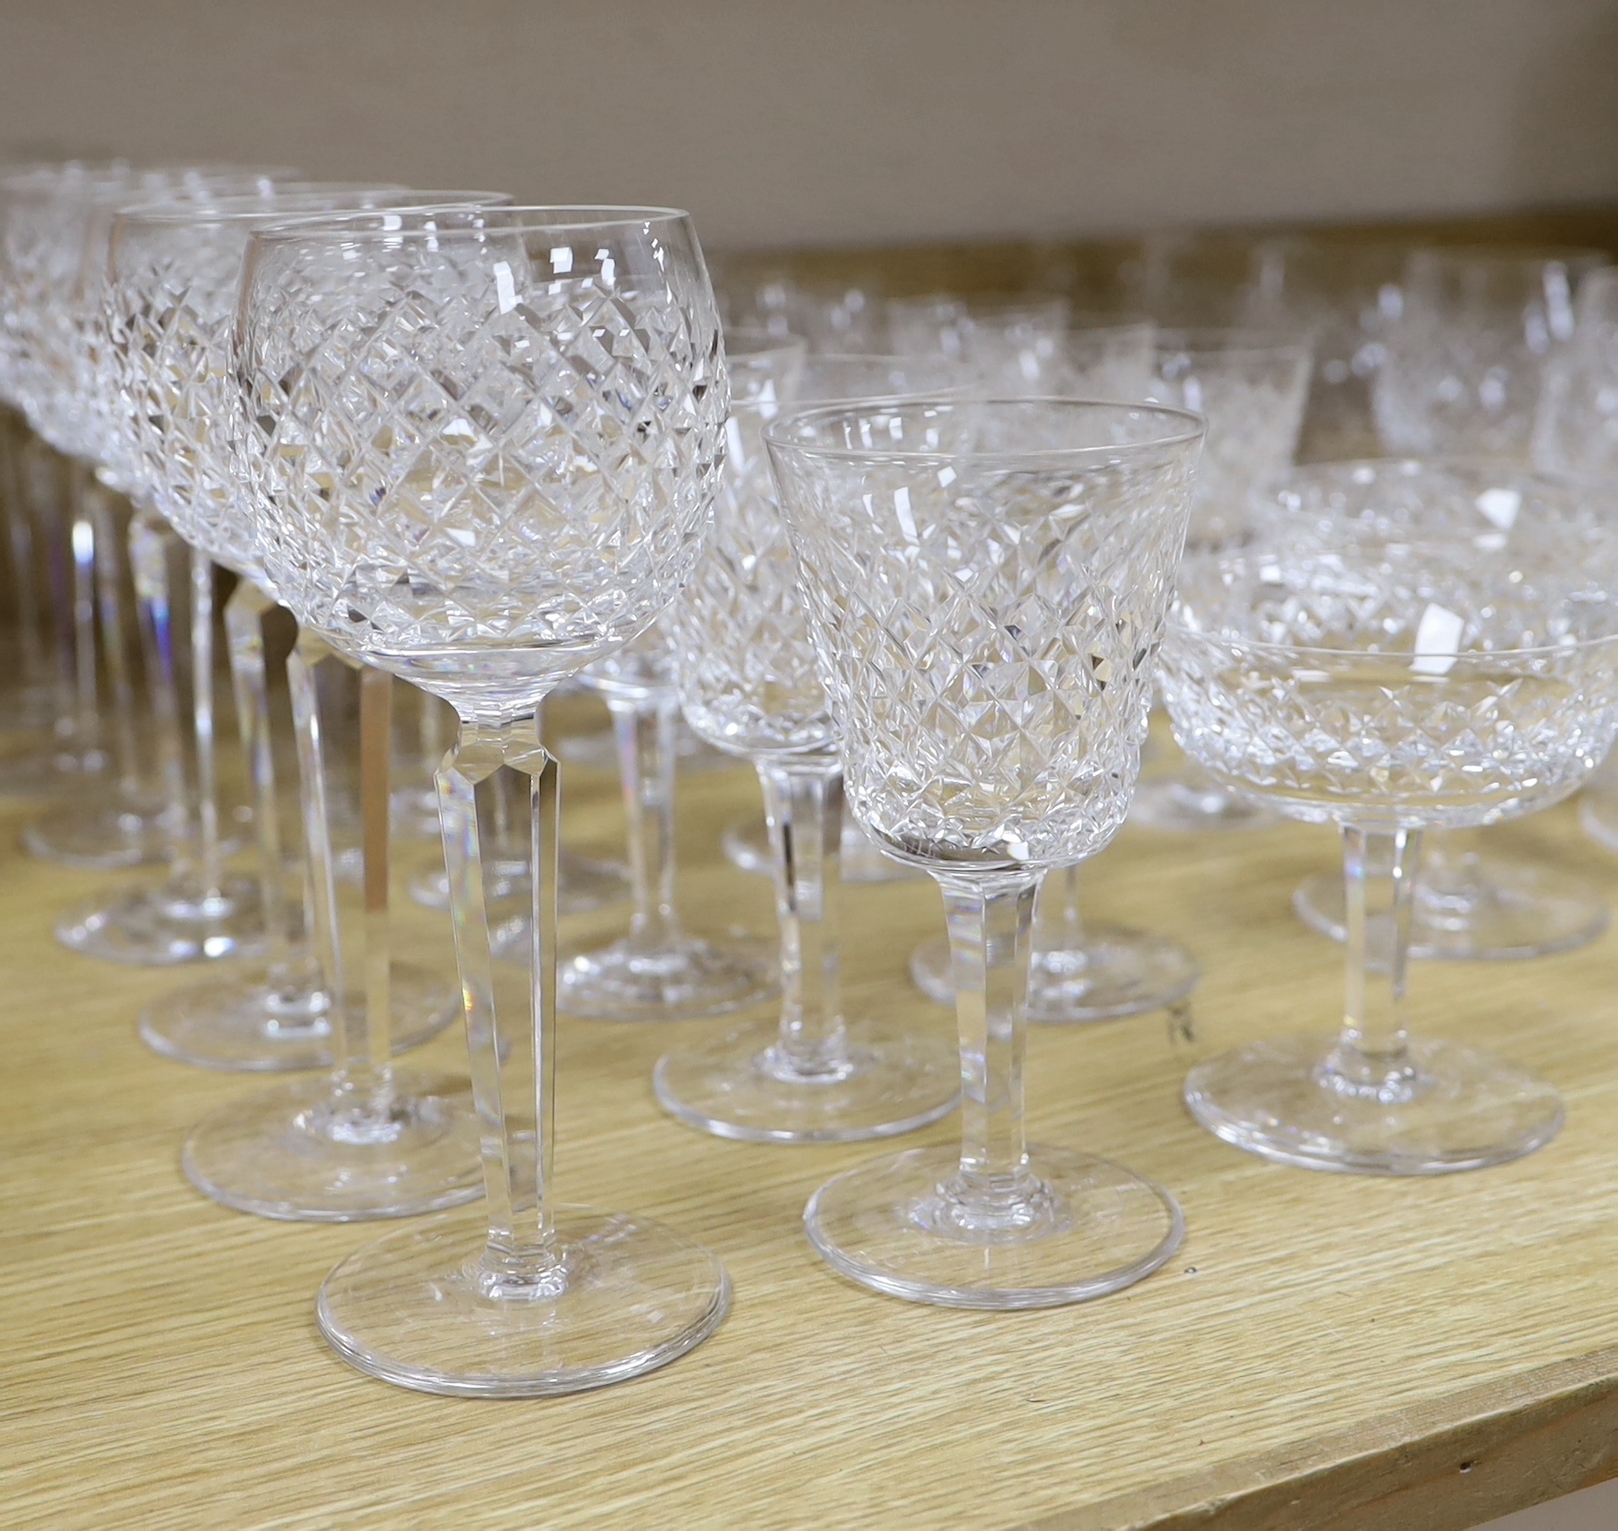 A part suite of Waterford drinking glassware, including champagne glasses, brandy glasses, liquor glasses, wine glasses, etc (61)